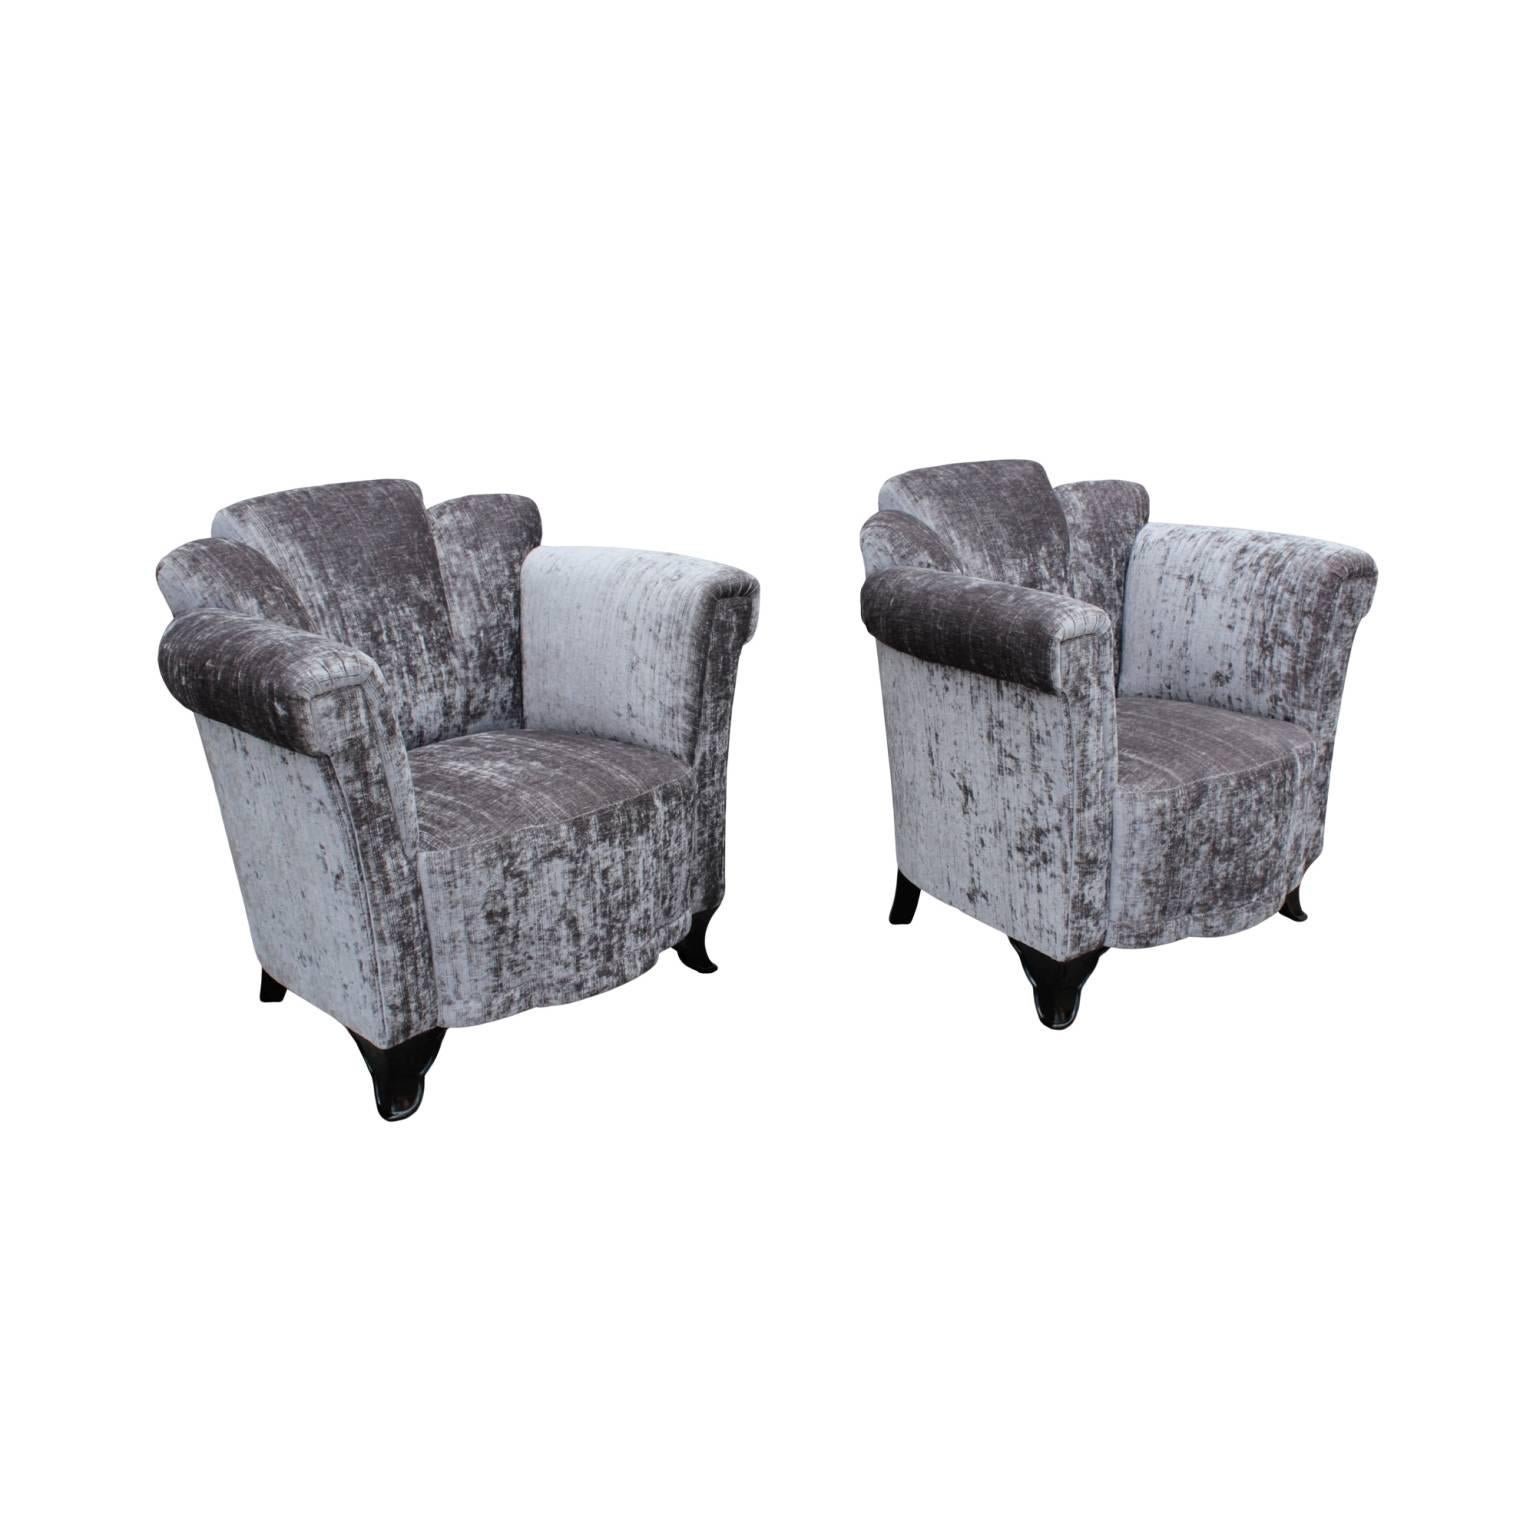 Extraordinary pair of early Art Deco period bergeres displaying sculptural quality and of superb comfort; featuring channelled backs, corresponding shaped box seats and elegant tall armrests. Shaped pair of front legs and back sabre legs in dark